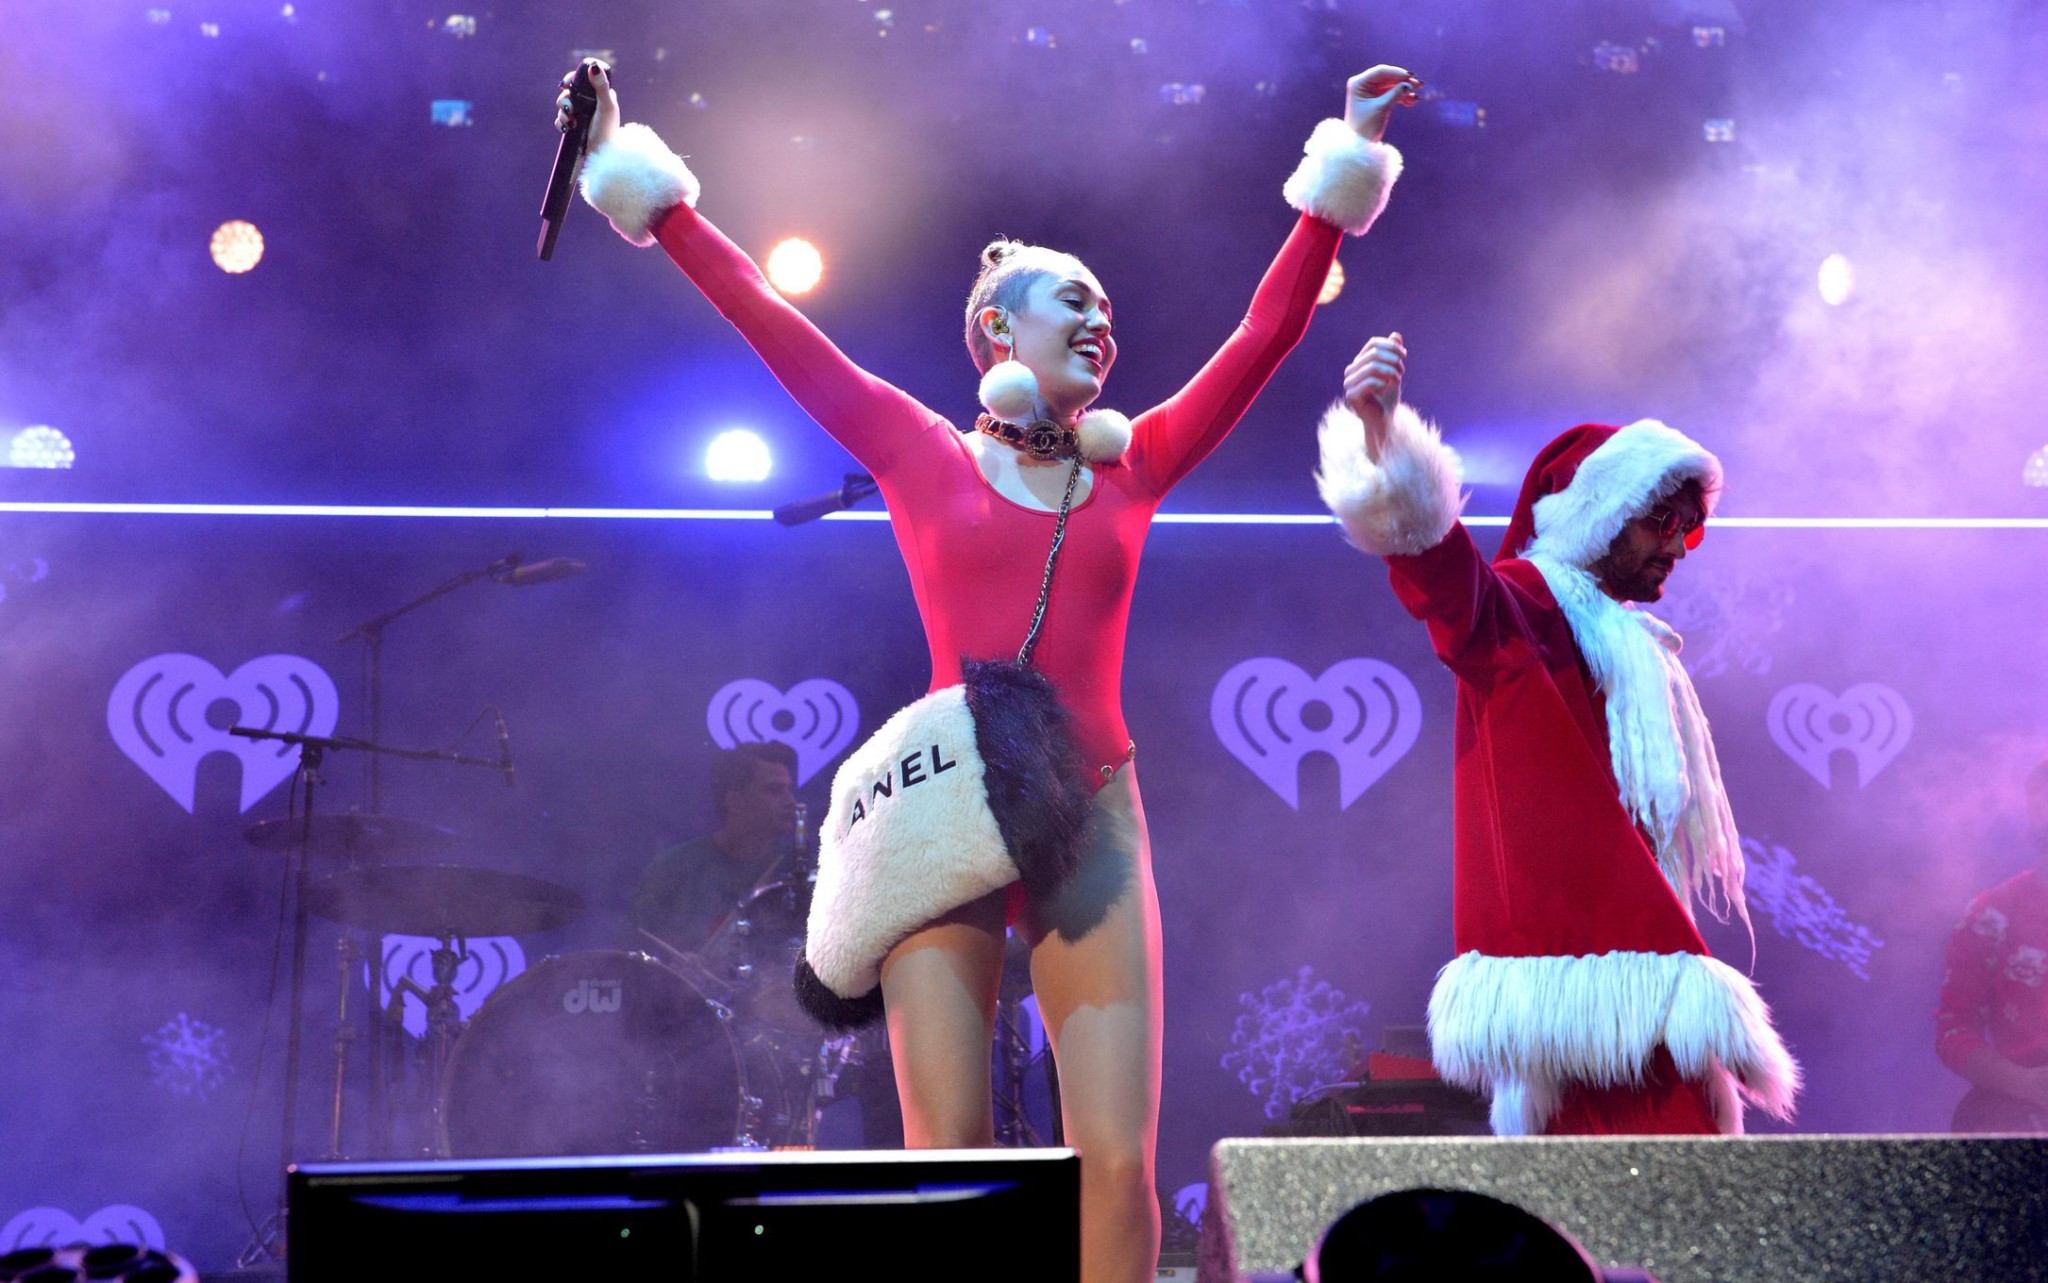 Miley Cyrus shows off pokies and ass wearing a red leotard on stage at 93.3 FLZ' #75209893